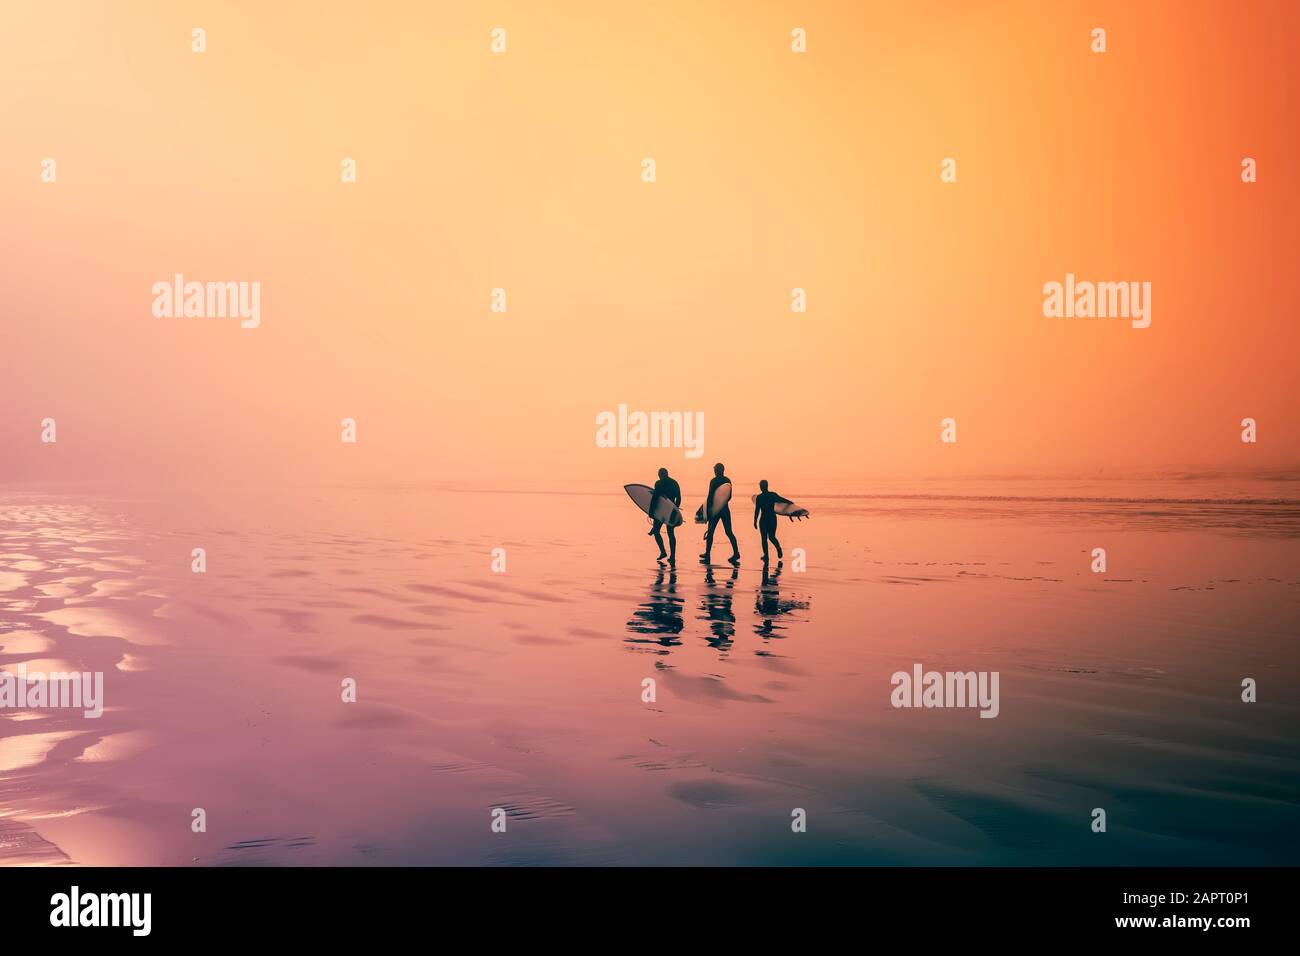 Colourful image. Early morning, surfers walking on the beach. Three surfers, walk along an ocean beach with their surfboards in hand. Stock Photo